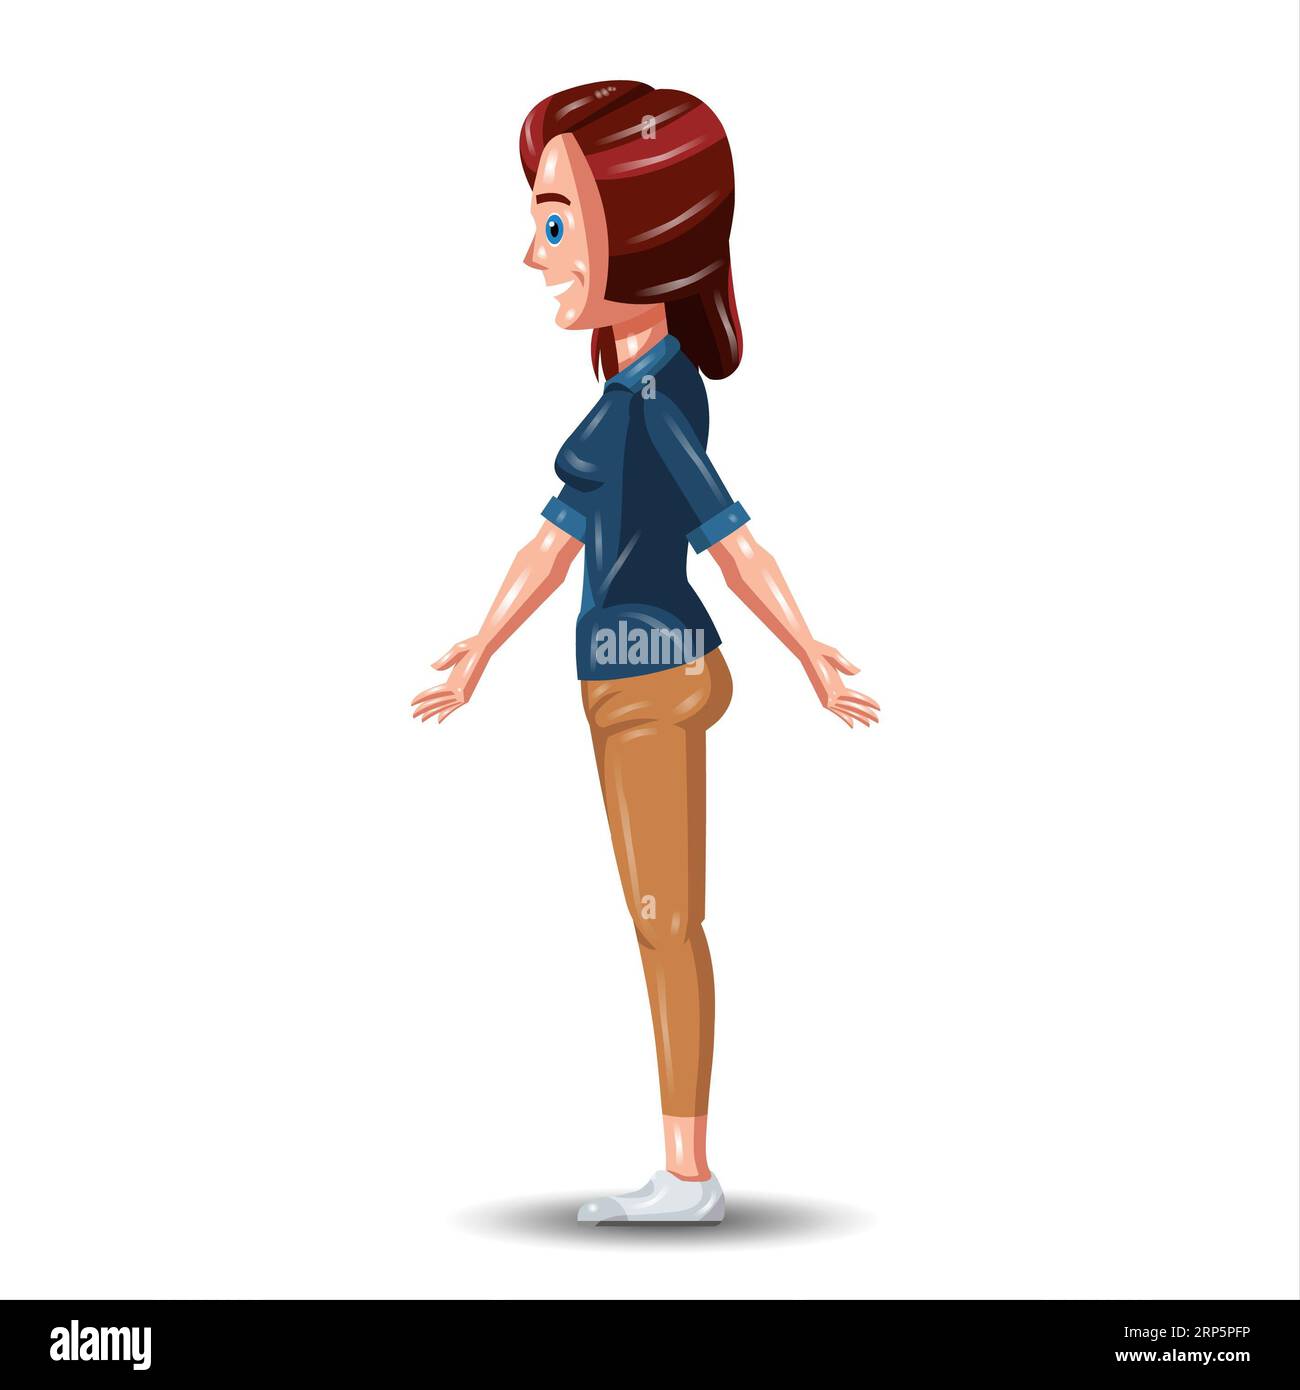 Young woman cartoon character isolated on a white background. Vector illustration. Stock Photo